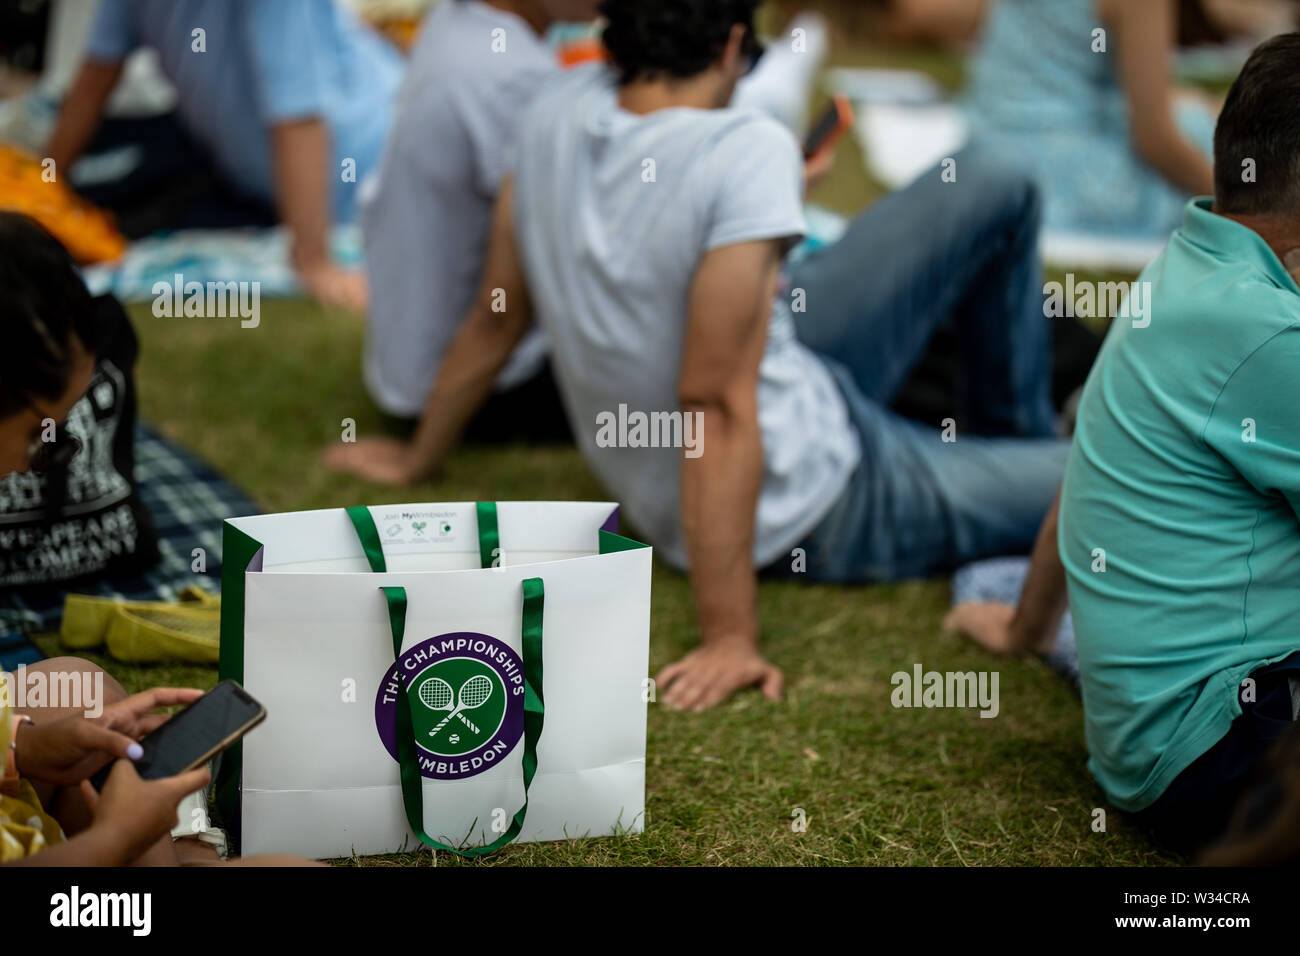 A Wimbledon bag on day eleven of the Wimbledon Championships at the All England Lawn Tennis and Croquet Club, Wimbledon. Stock Photo